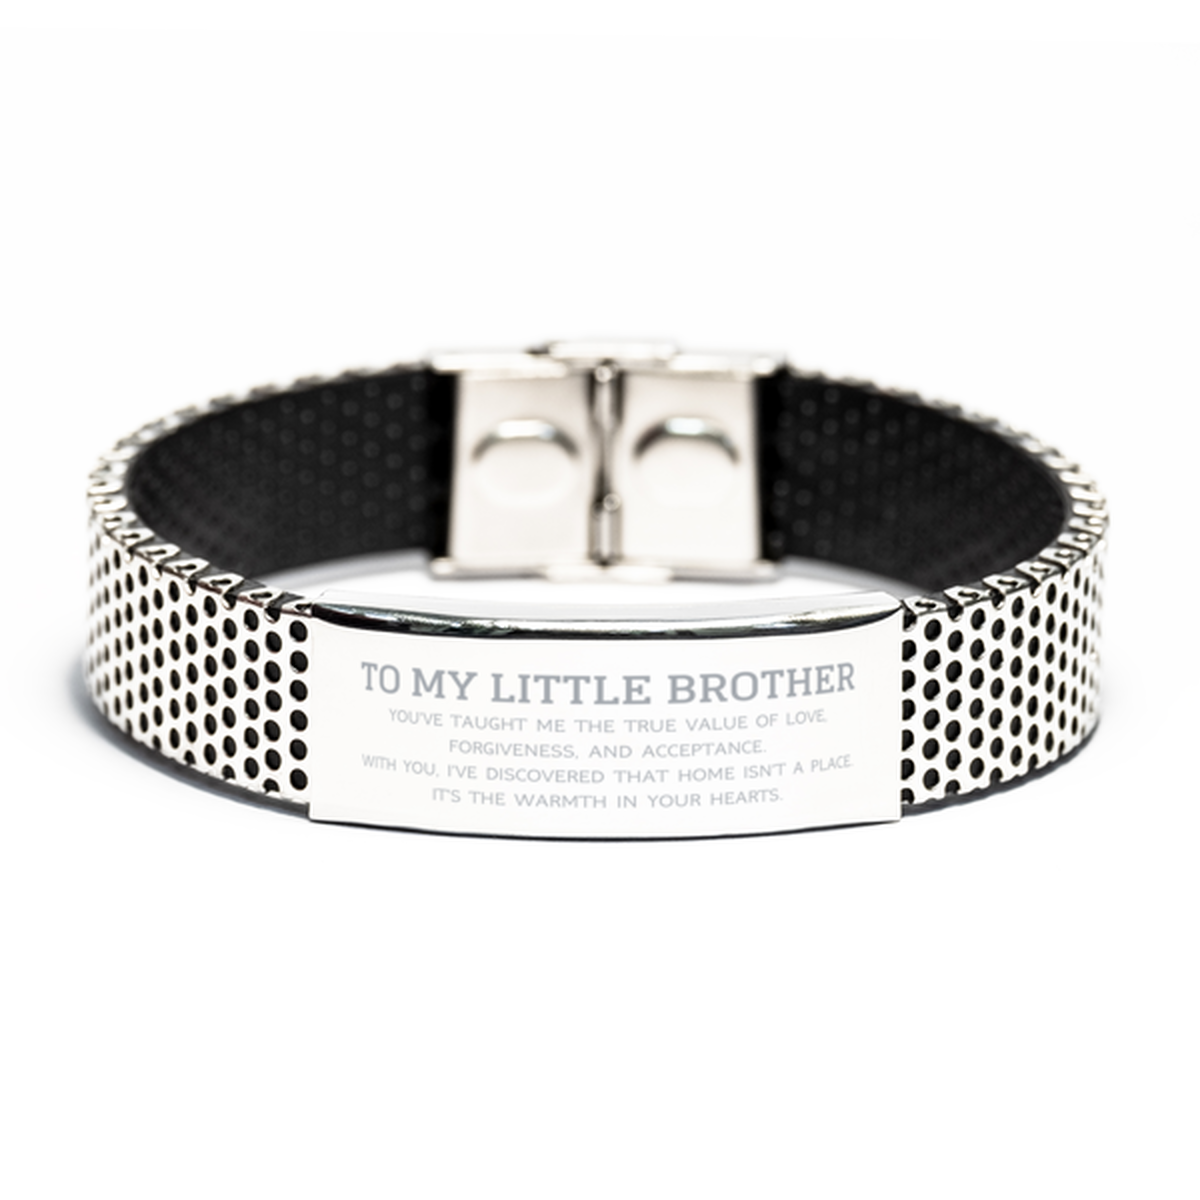 To My Little Brother Gifts, You've taught me the true value of love, Thank You Gifts For Little Brother, Birthday Stainless Steel Bracelet For Little Brother